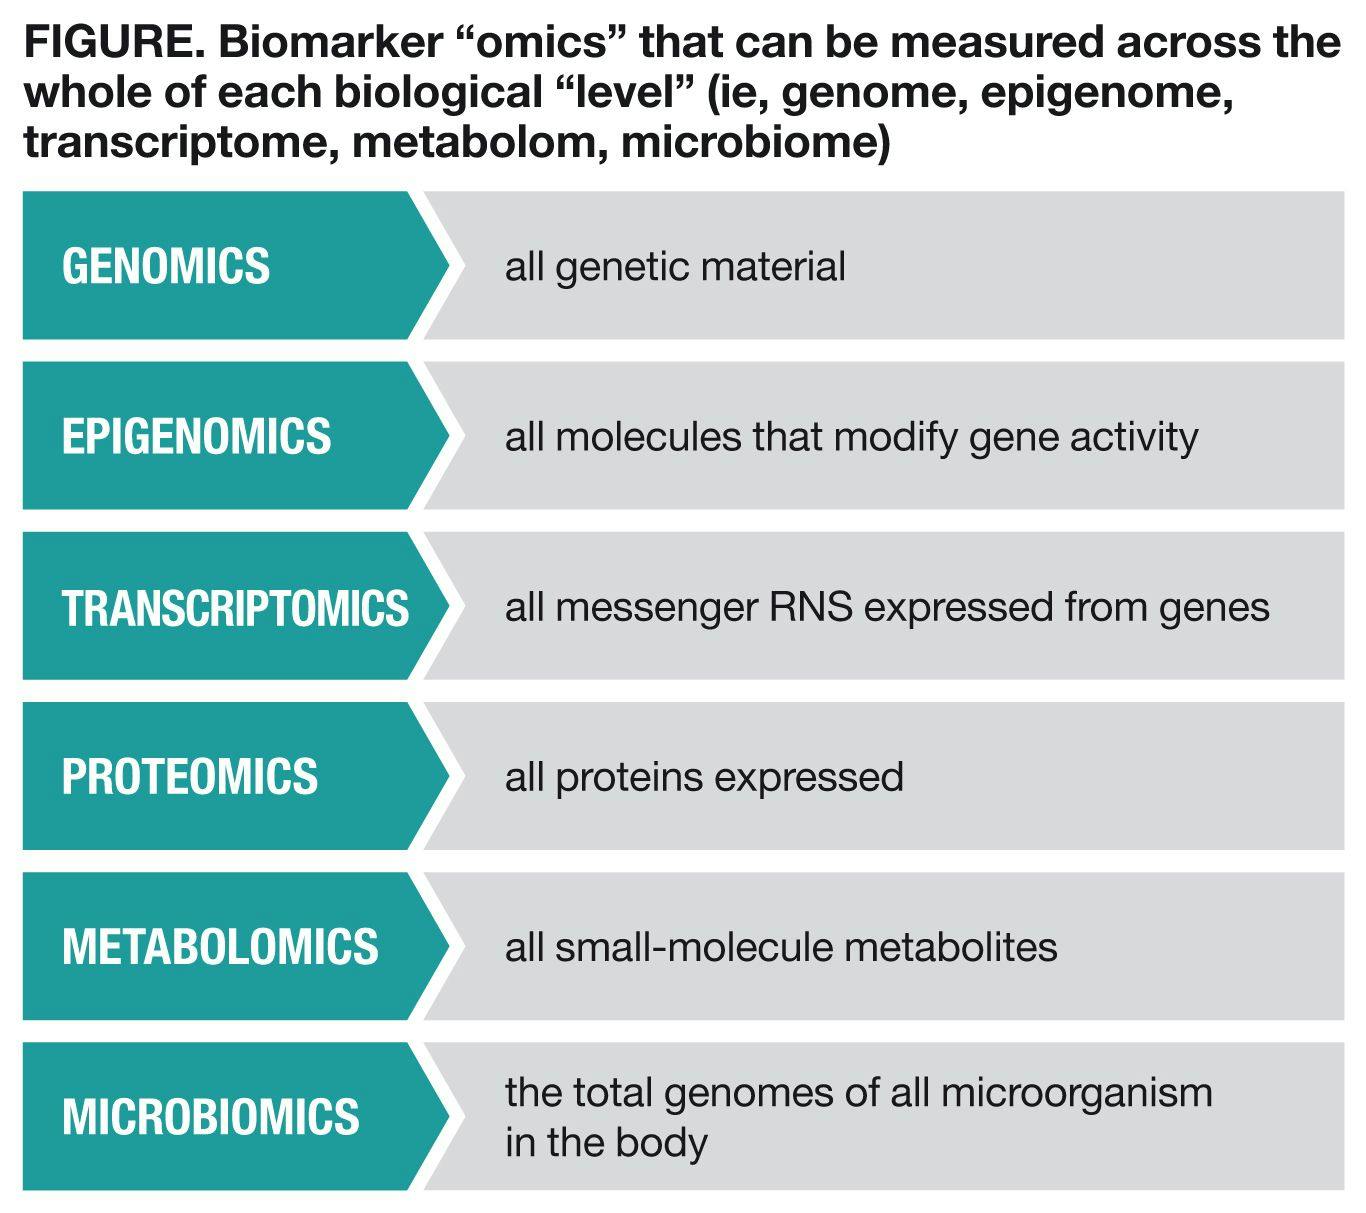 Biomarker “omics” that can be measured across the whole of each biological “level”